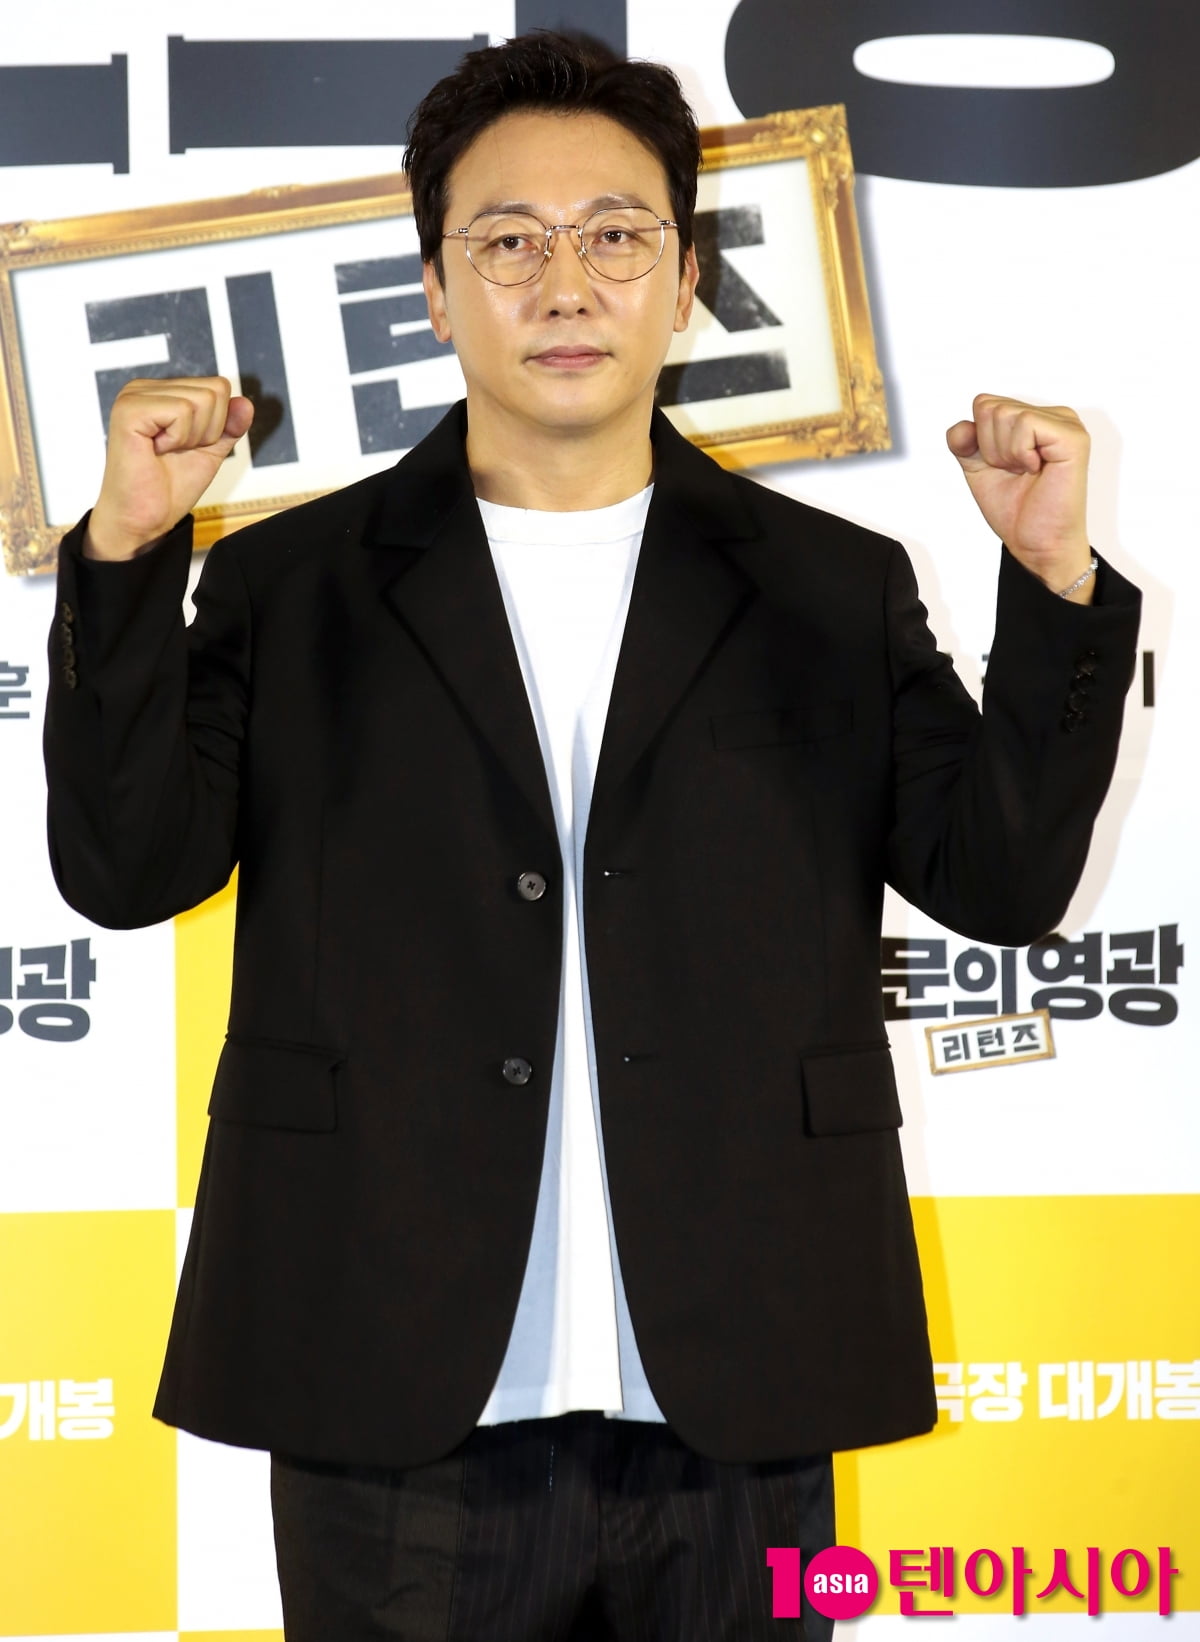 Tak Jae-hoon “Please don’t expect the quality of the work.”